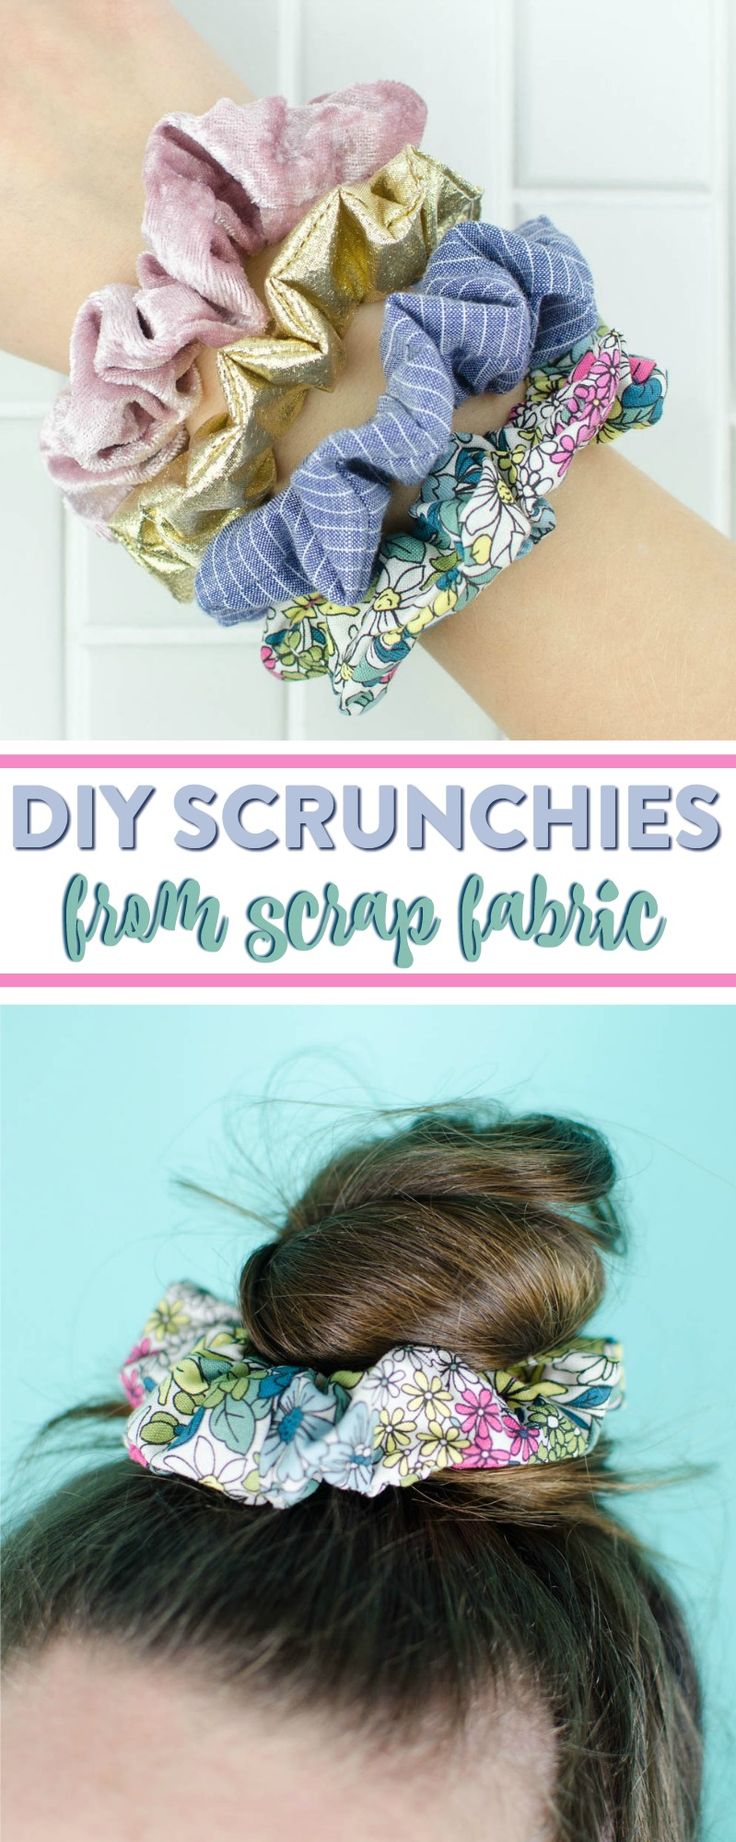 I am so excited to share today’s easy sewing project with you.  SCRUNCHIES ARE...